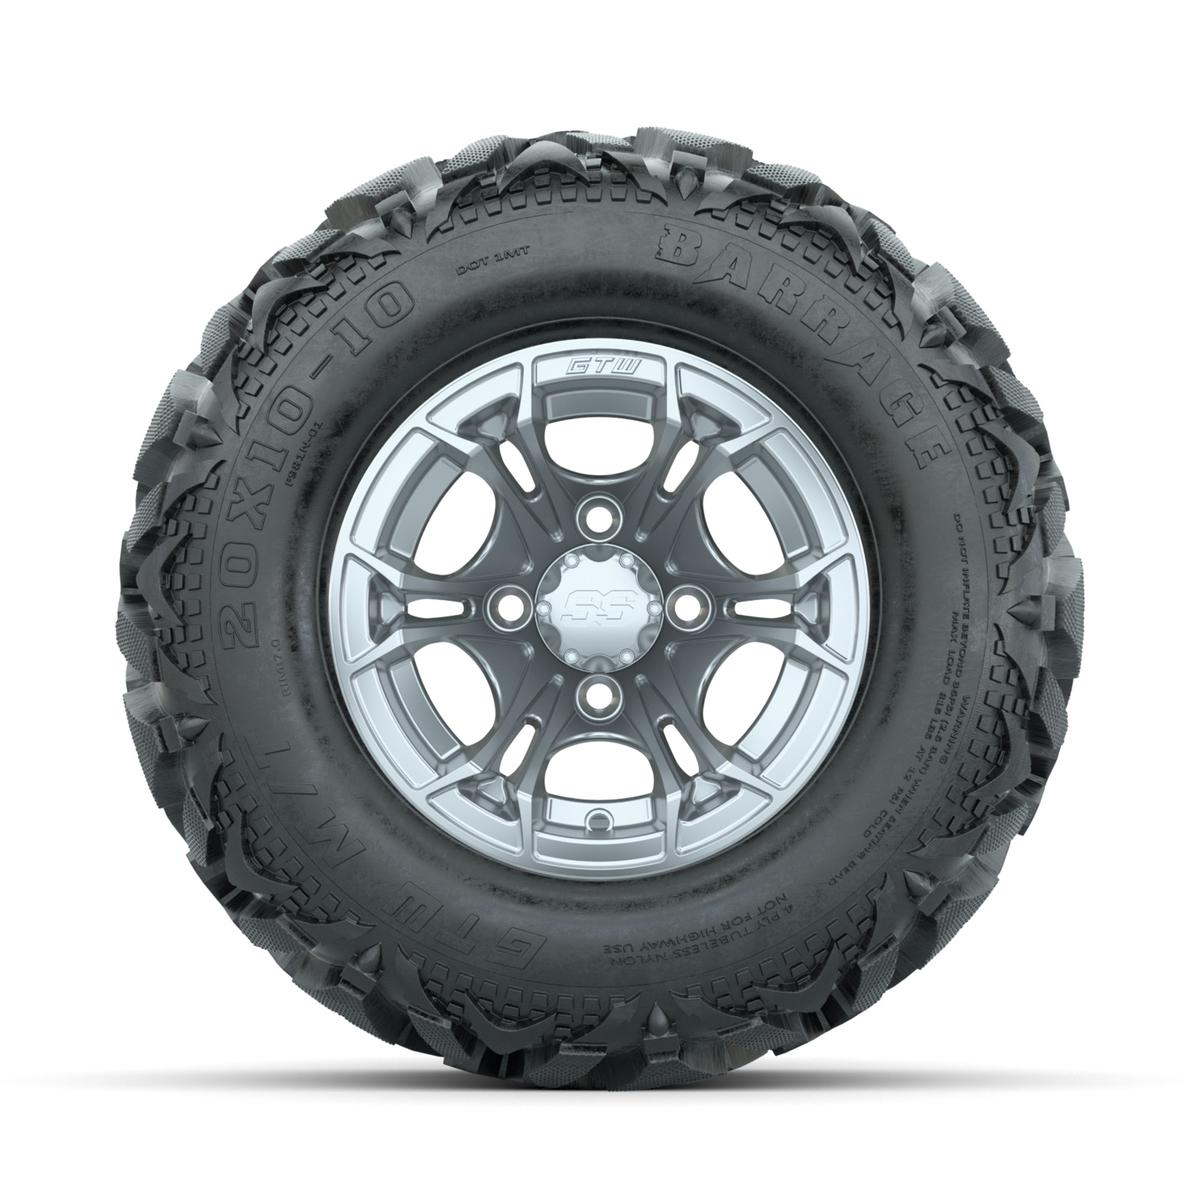 GTW Spyder Silver Brush 10 in Wheels with 20x10-10 Barrage Mud Tires – Full Set